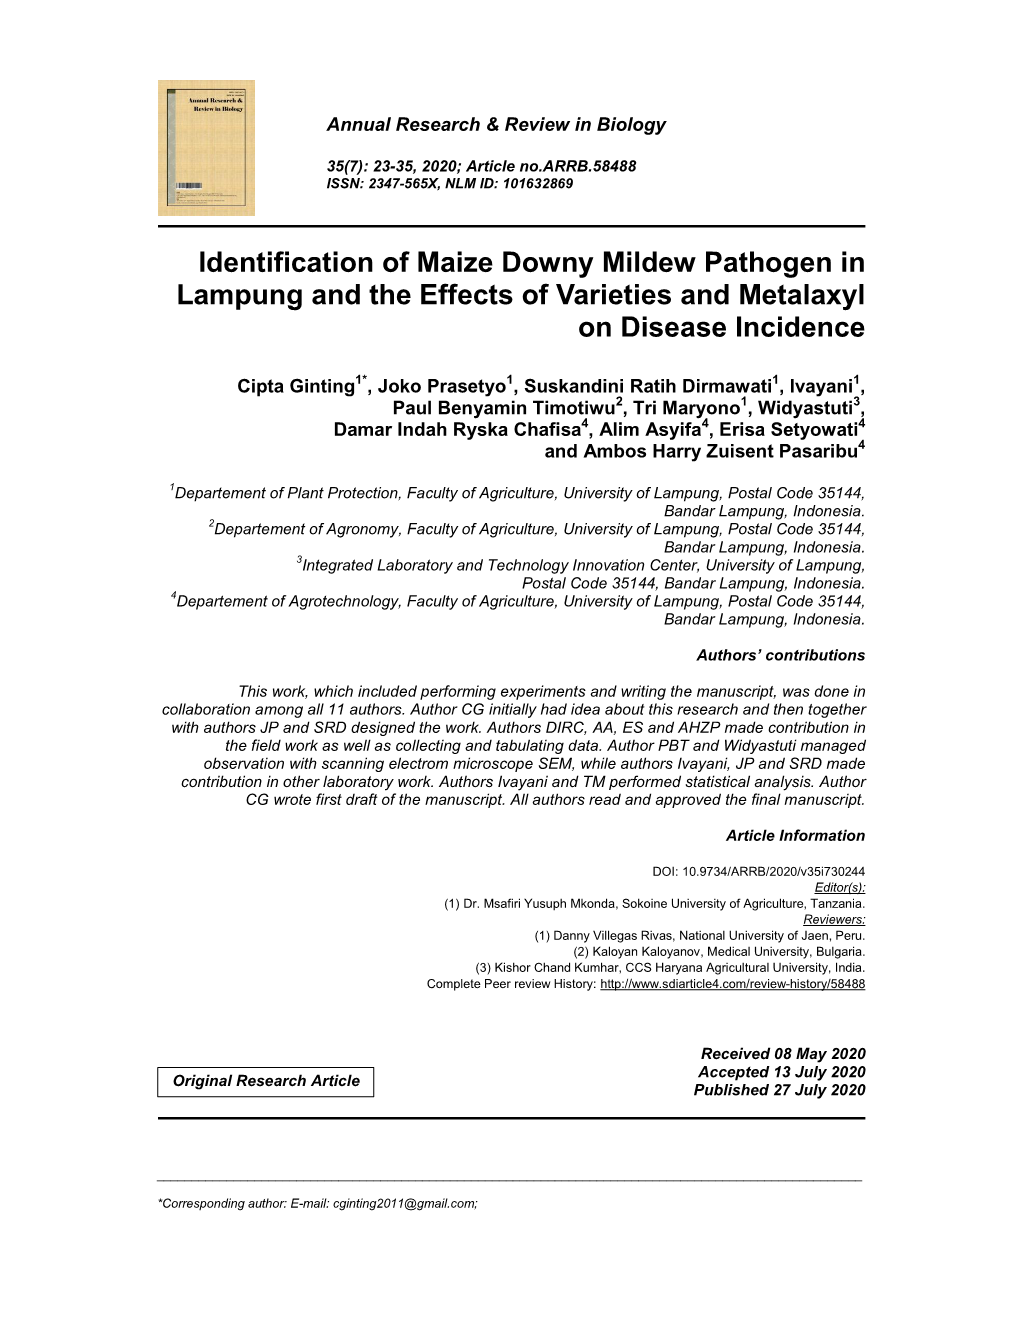 Identification of Maize Downy Mildew Pathogen in Lampung and the Effects of Varieties and Metalaxyl on Disease Incidence